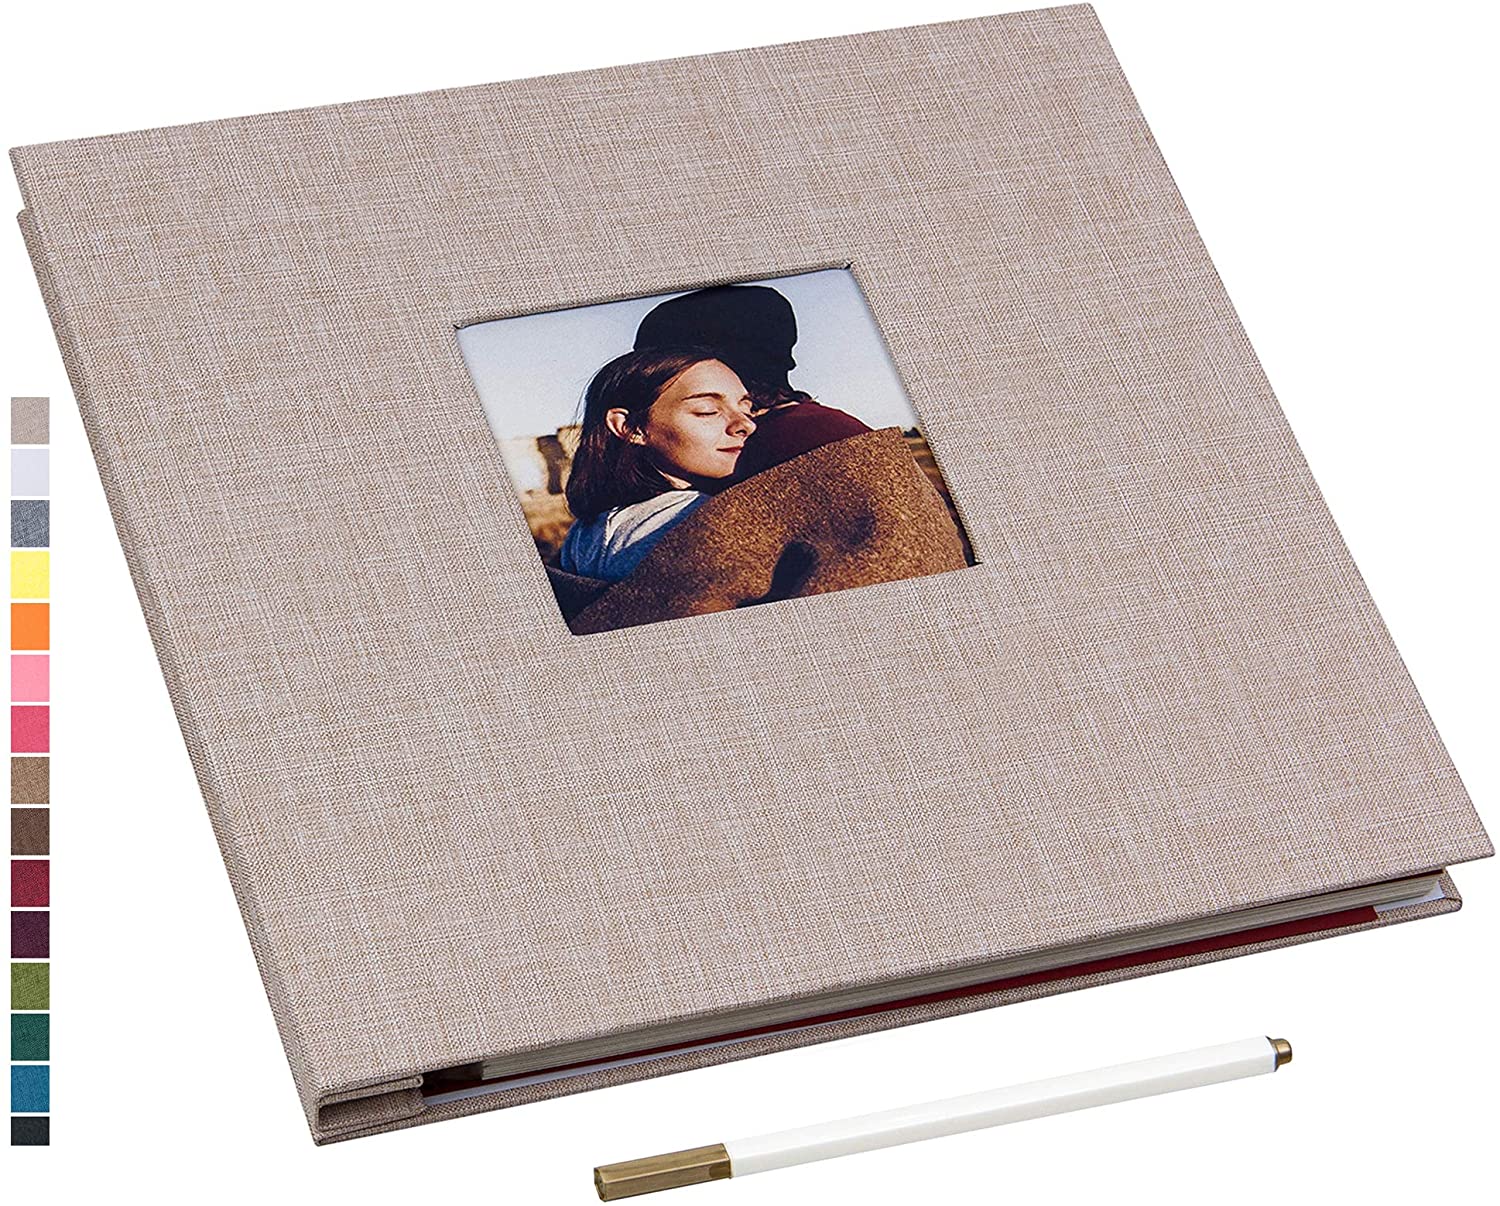 Potricher Self-Adhesive Magnetic Double Sided Photo Album Scrapbook